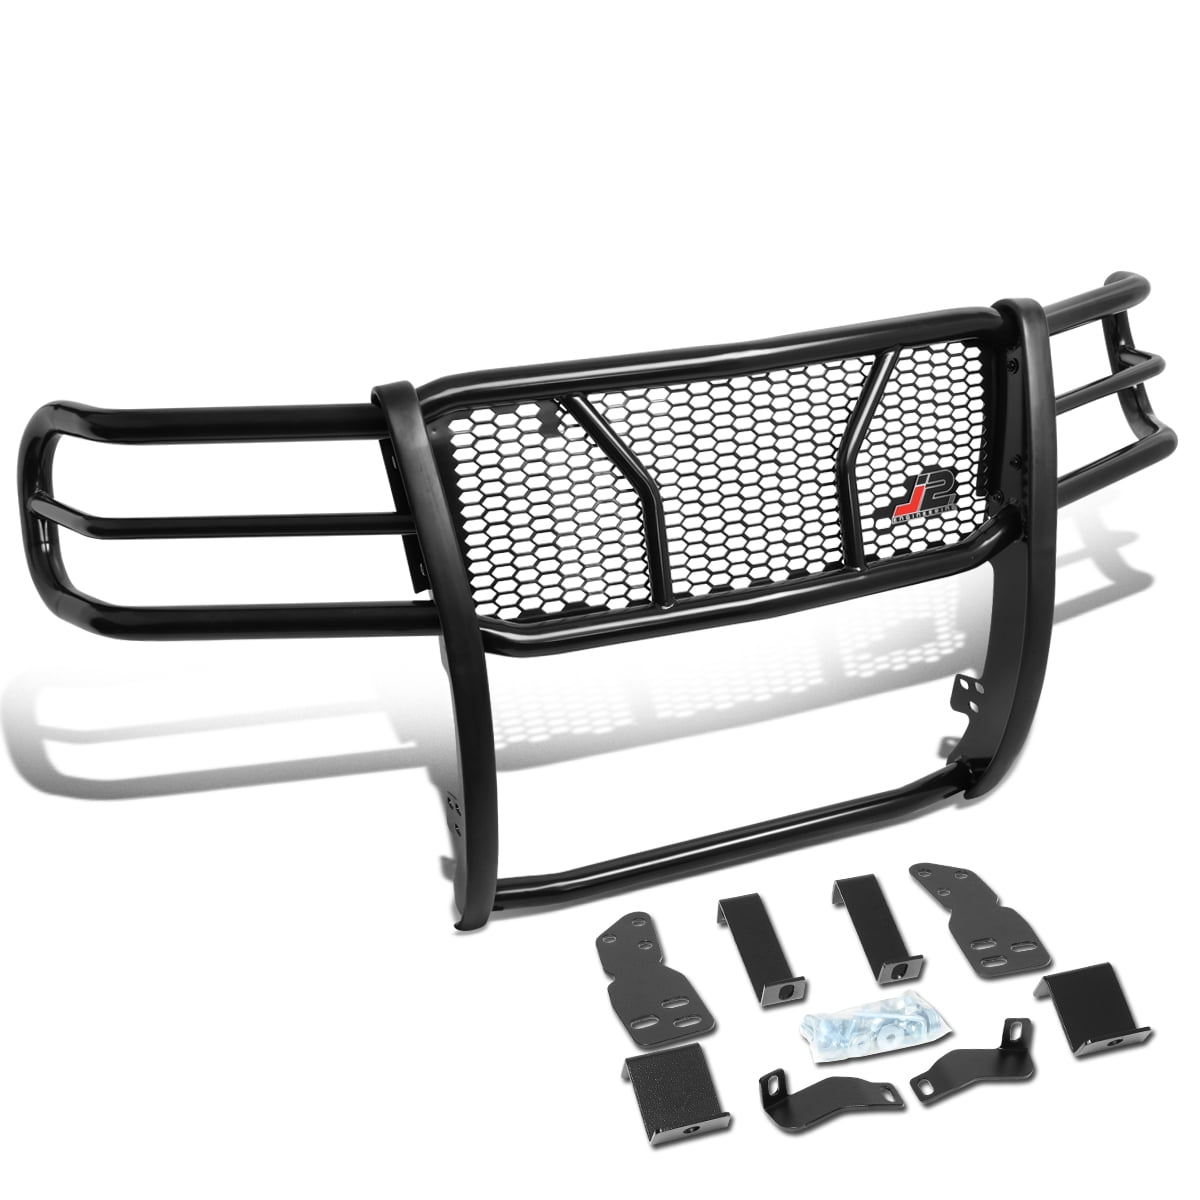 J2 Engineering J2 Gg 009 J2 Engineering For 07 To 13 Gmc Sierra 1500 Front Bumper Grille Protector Honeycomb Mesh Brush Guard 08 09 10 11 12 Walmart Com